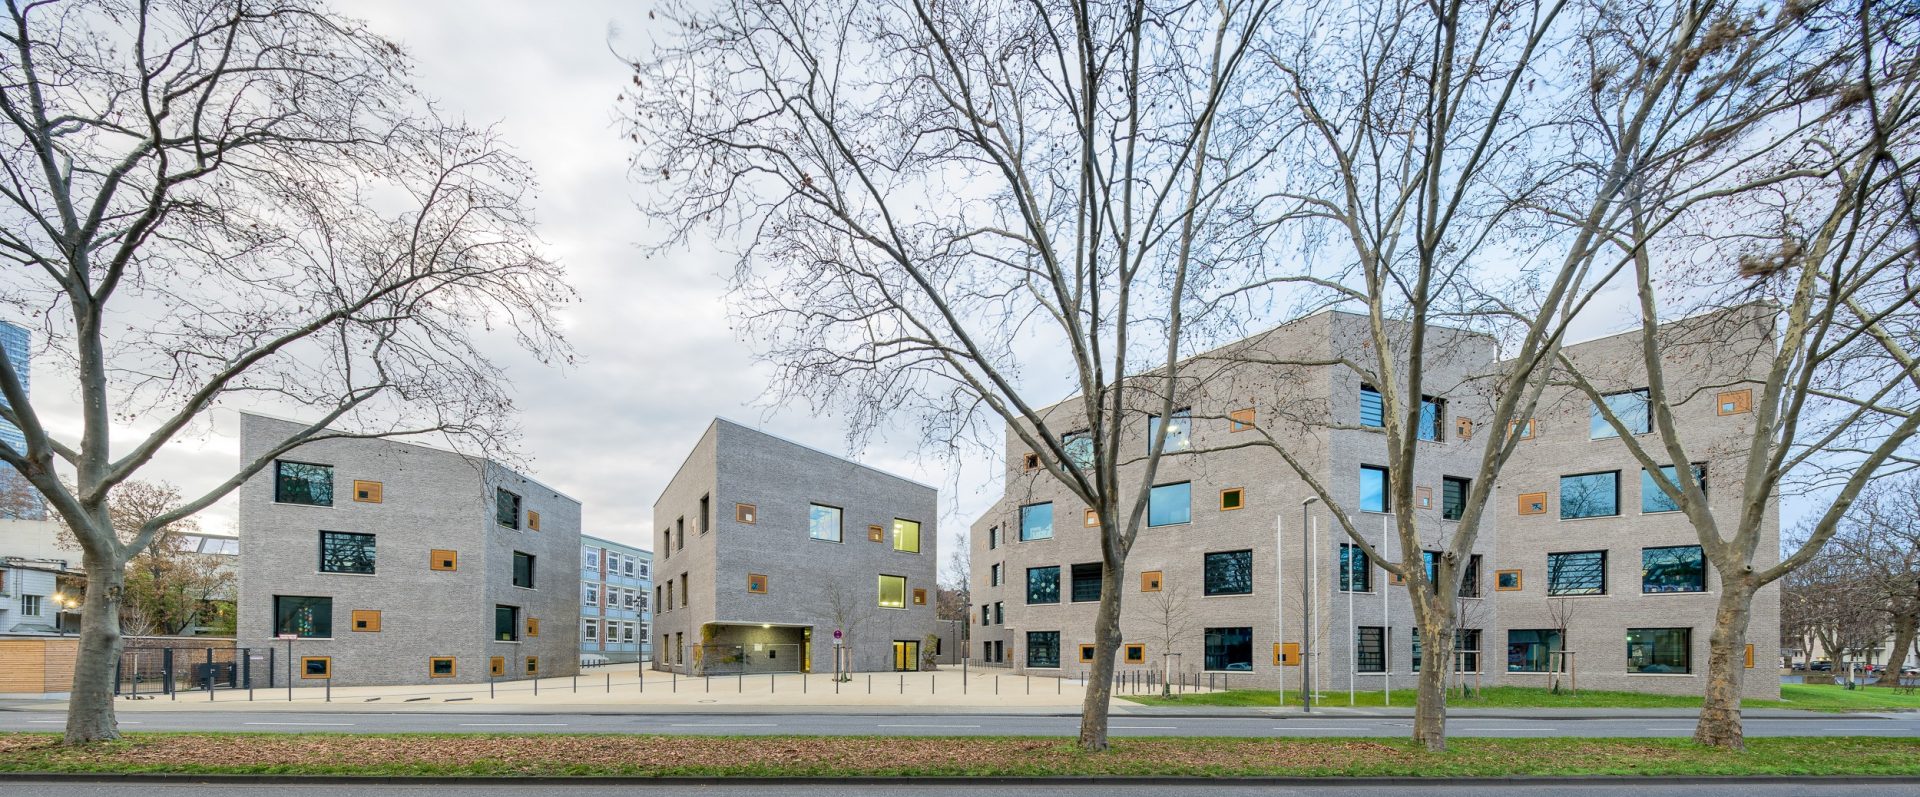 Learning in pentagons: the new educational landscape in Cologne by gernot schulz : architektur.